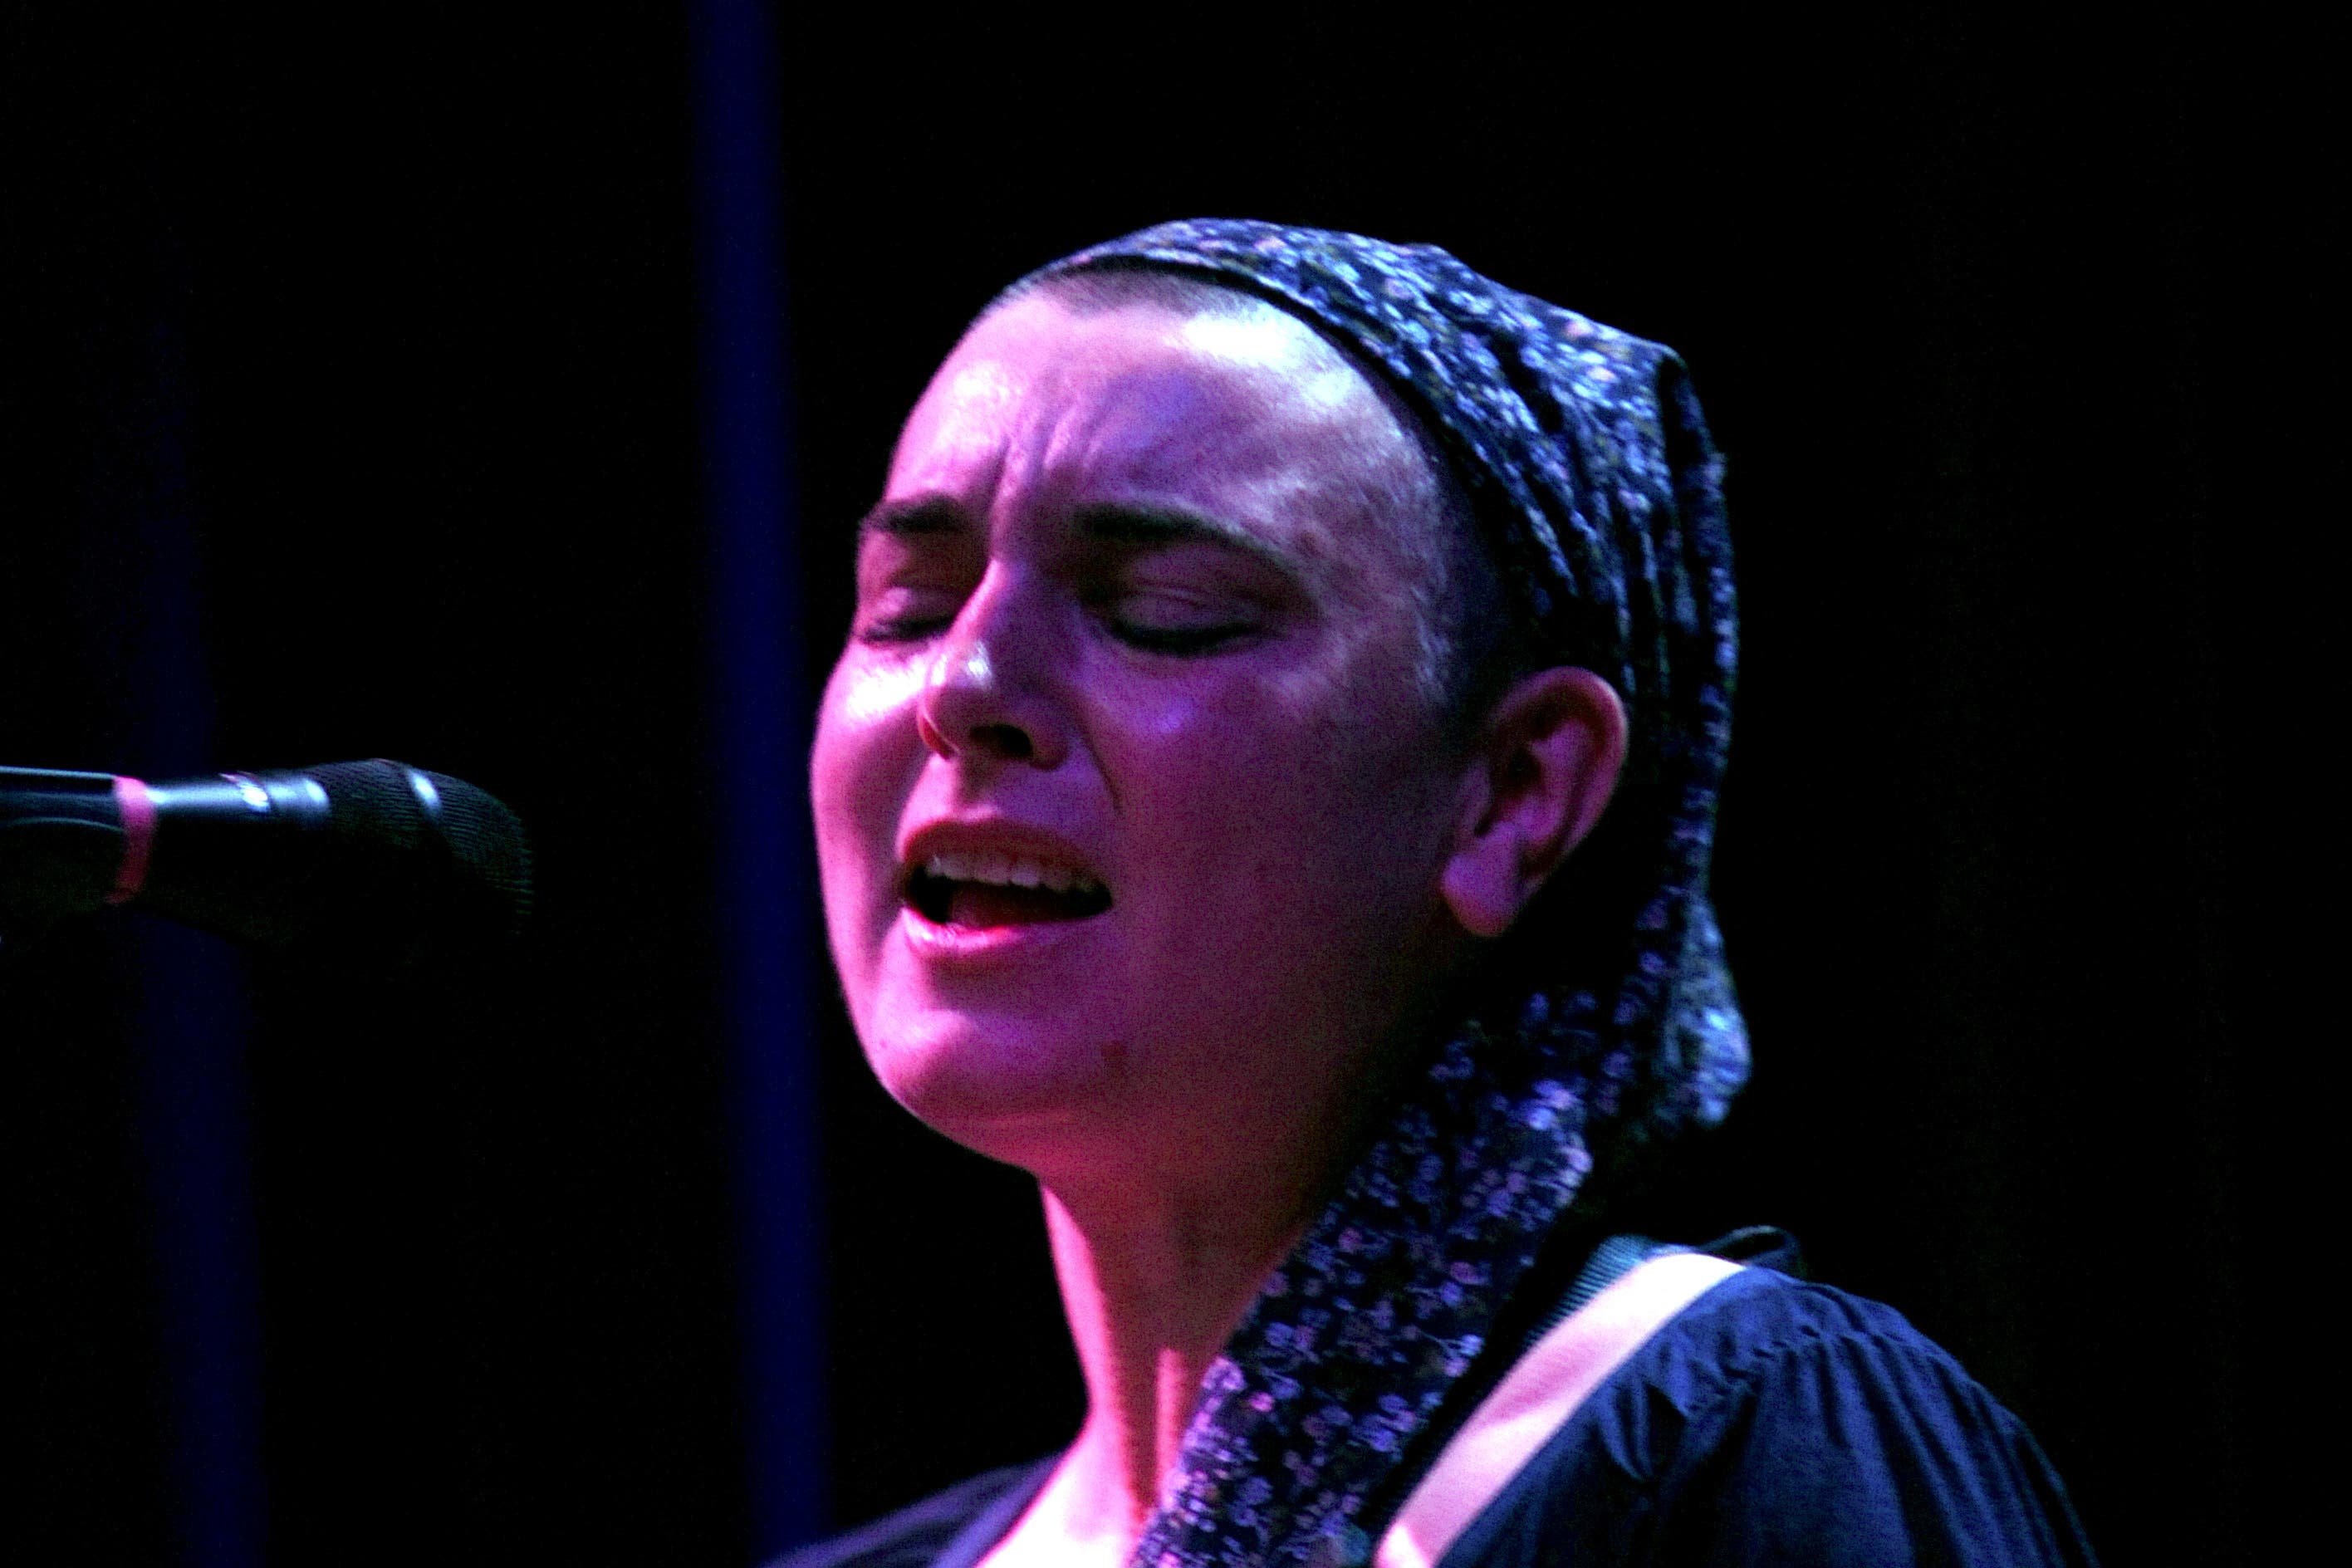 Sinead O’Connor has died at the age of 56 (Zak Hussein/PA)